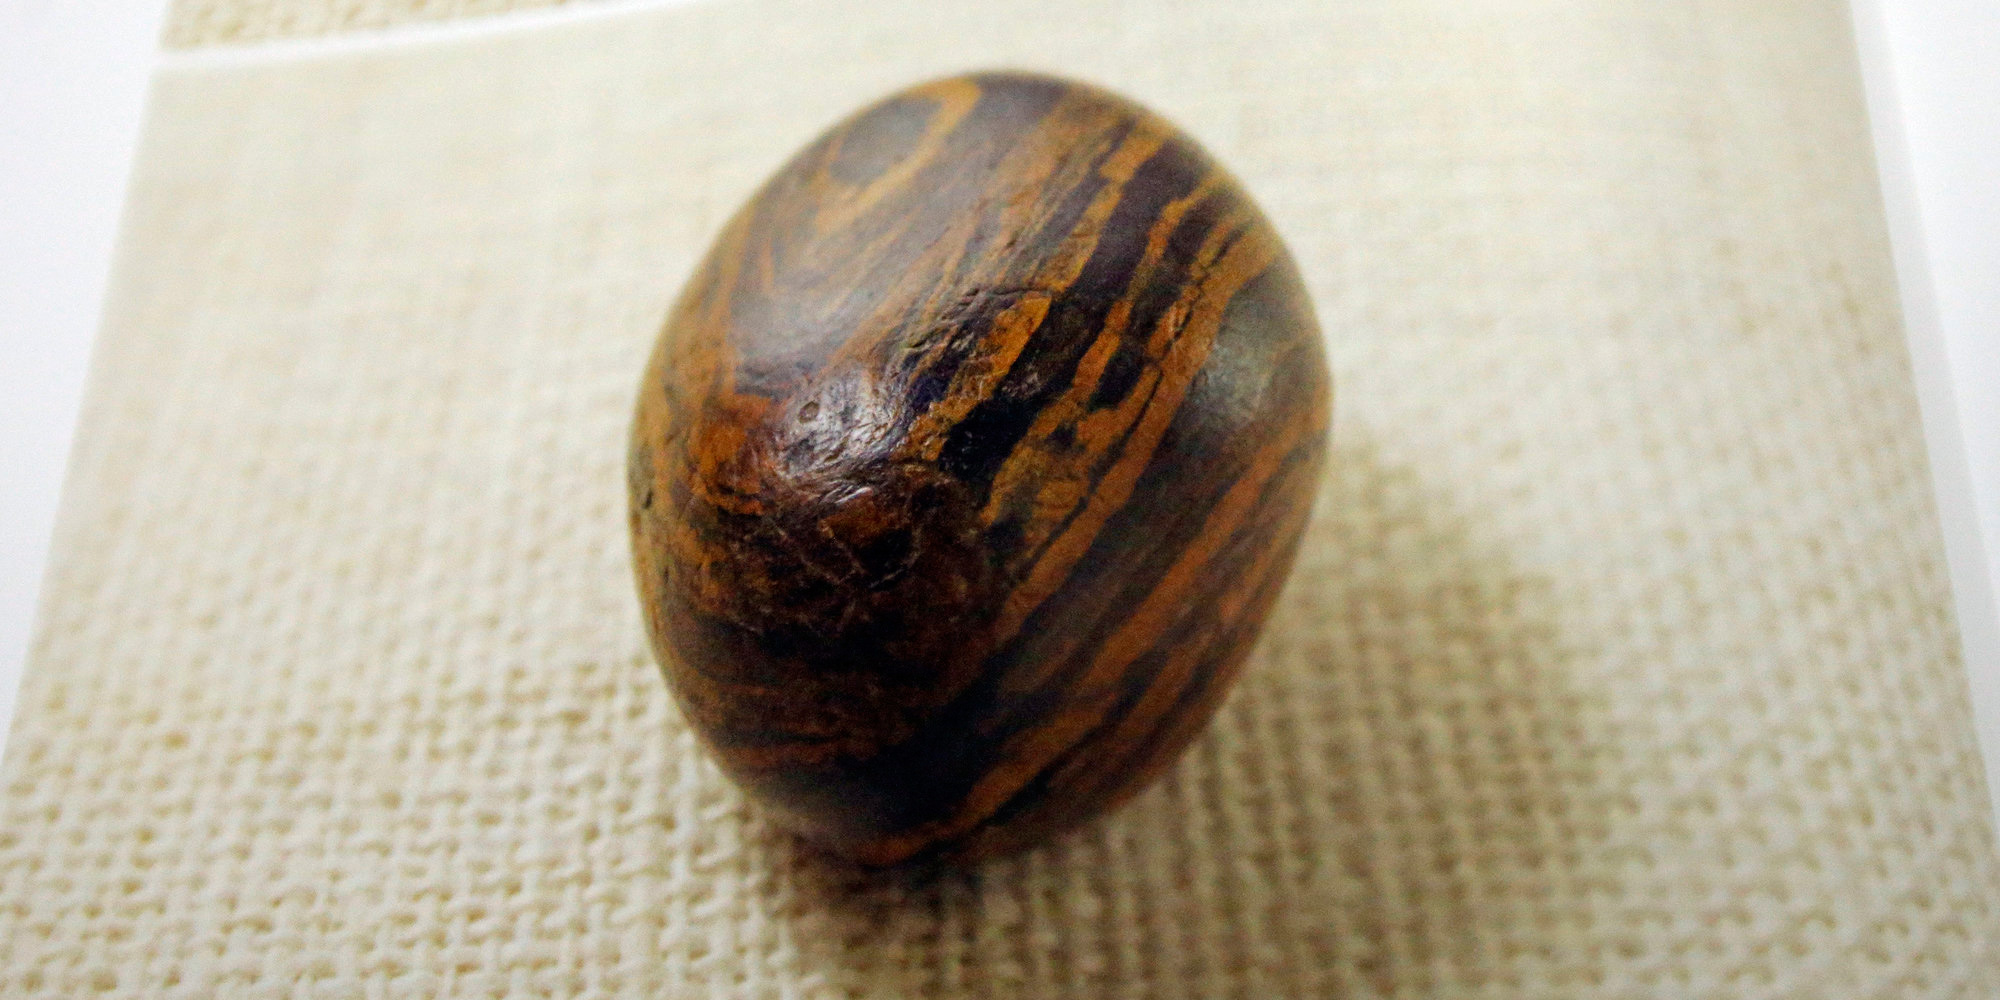 A small stone sits on a cloth. The stone has various small pits and is a dark brown, colored with rust-colored stripes.